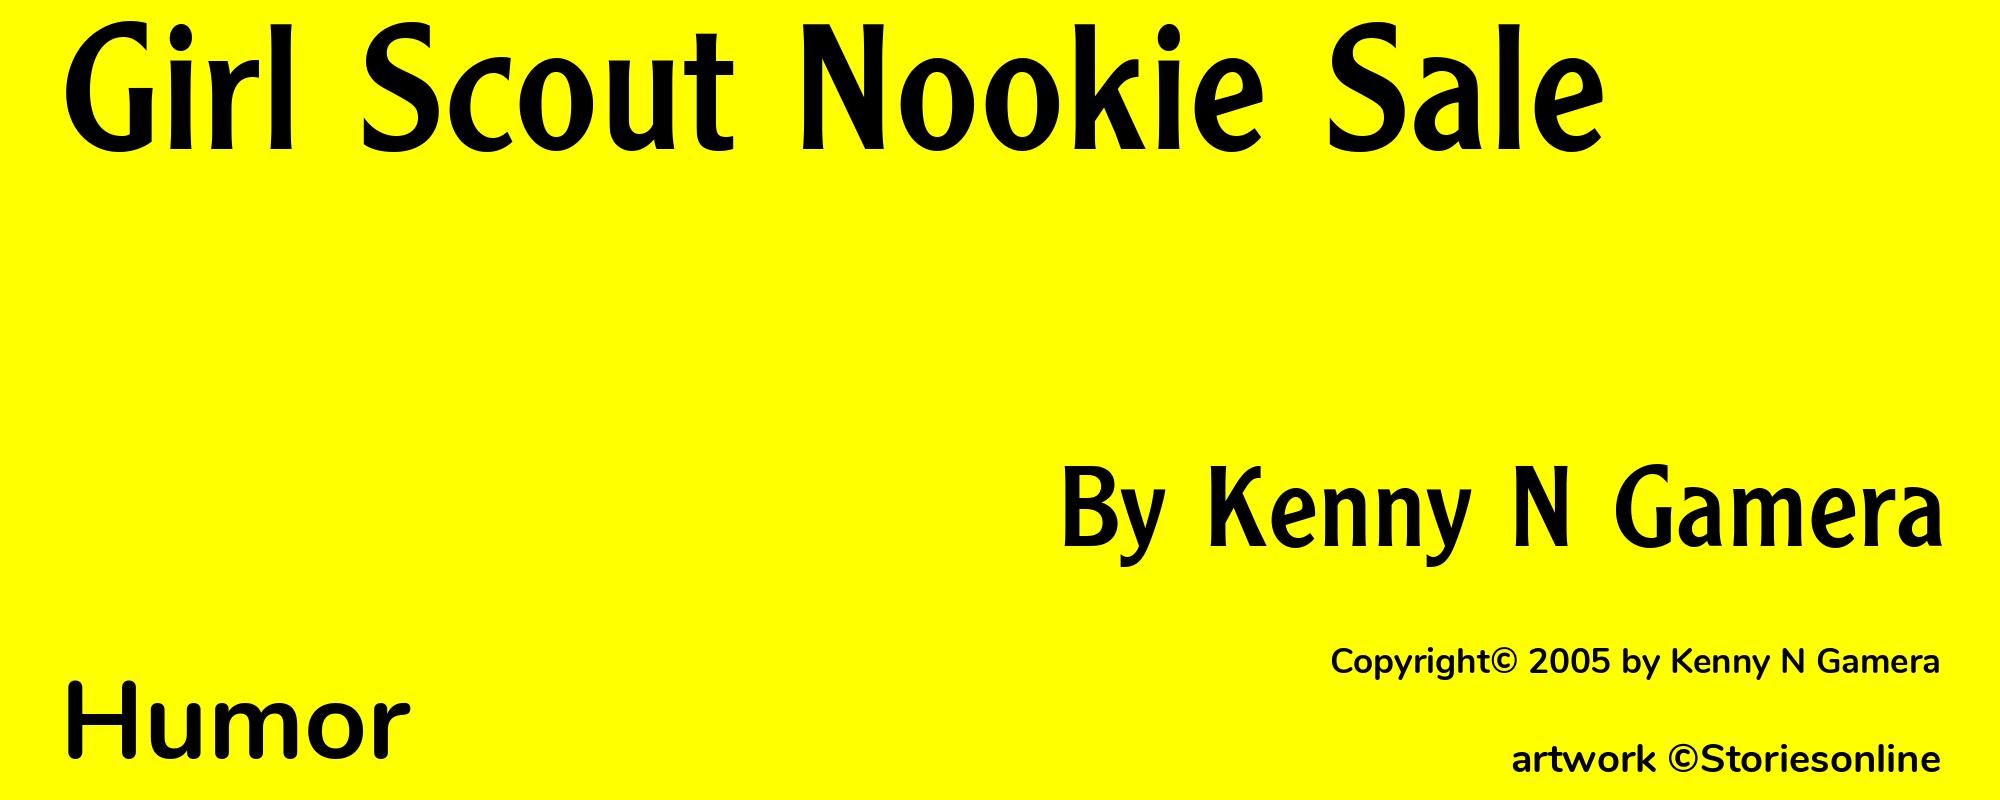 Girl Scout Nookie Sale - Cover